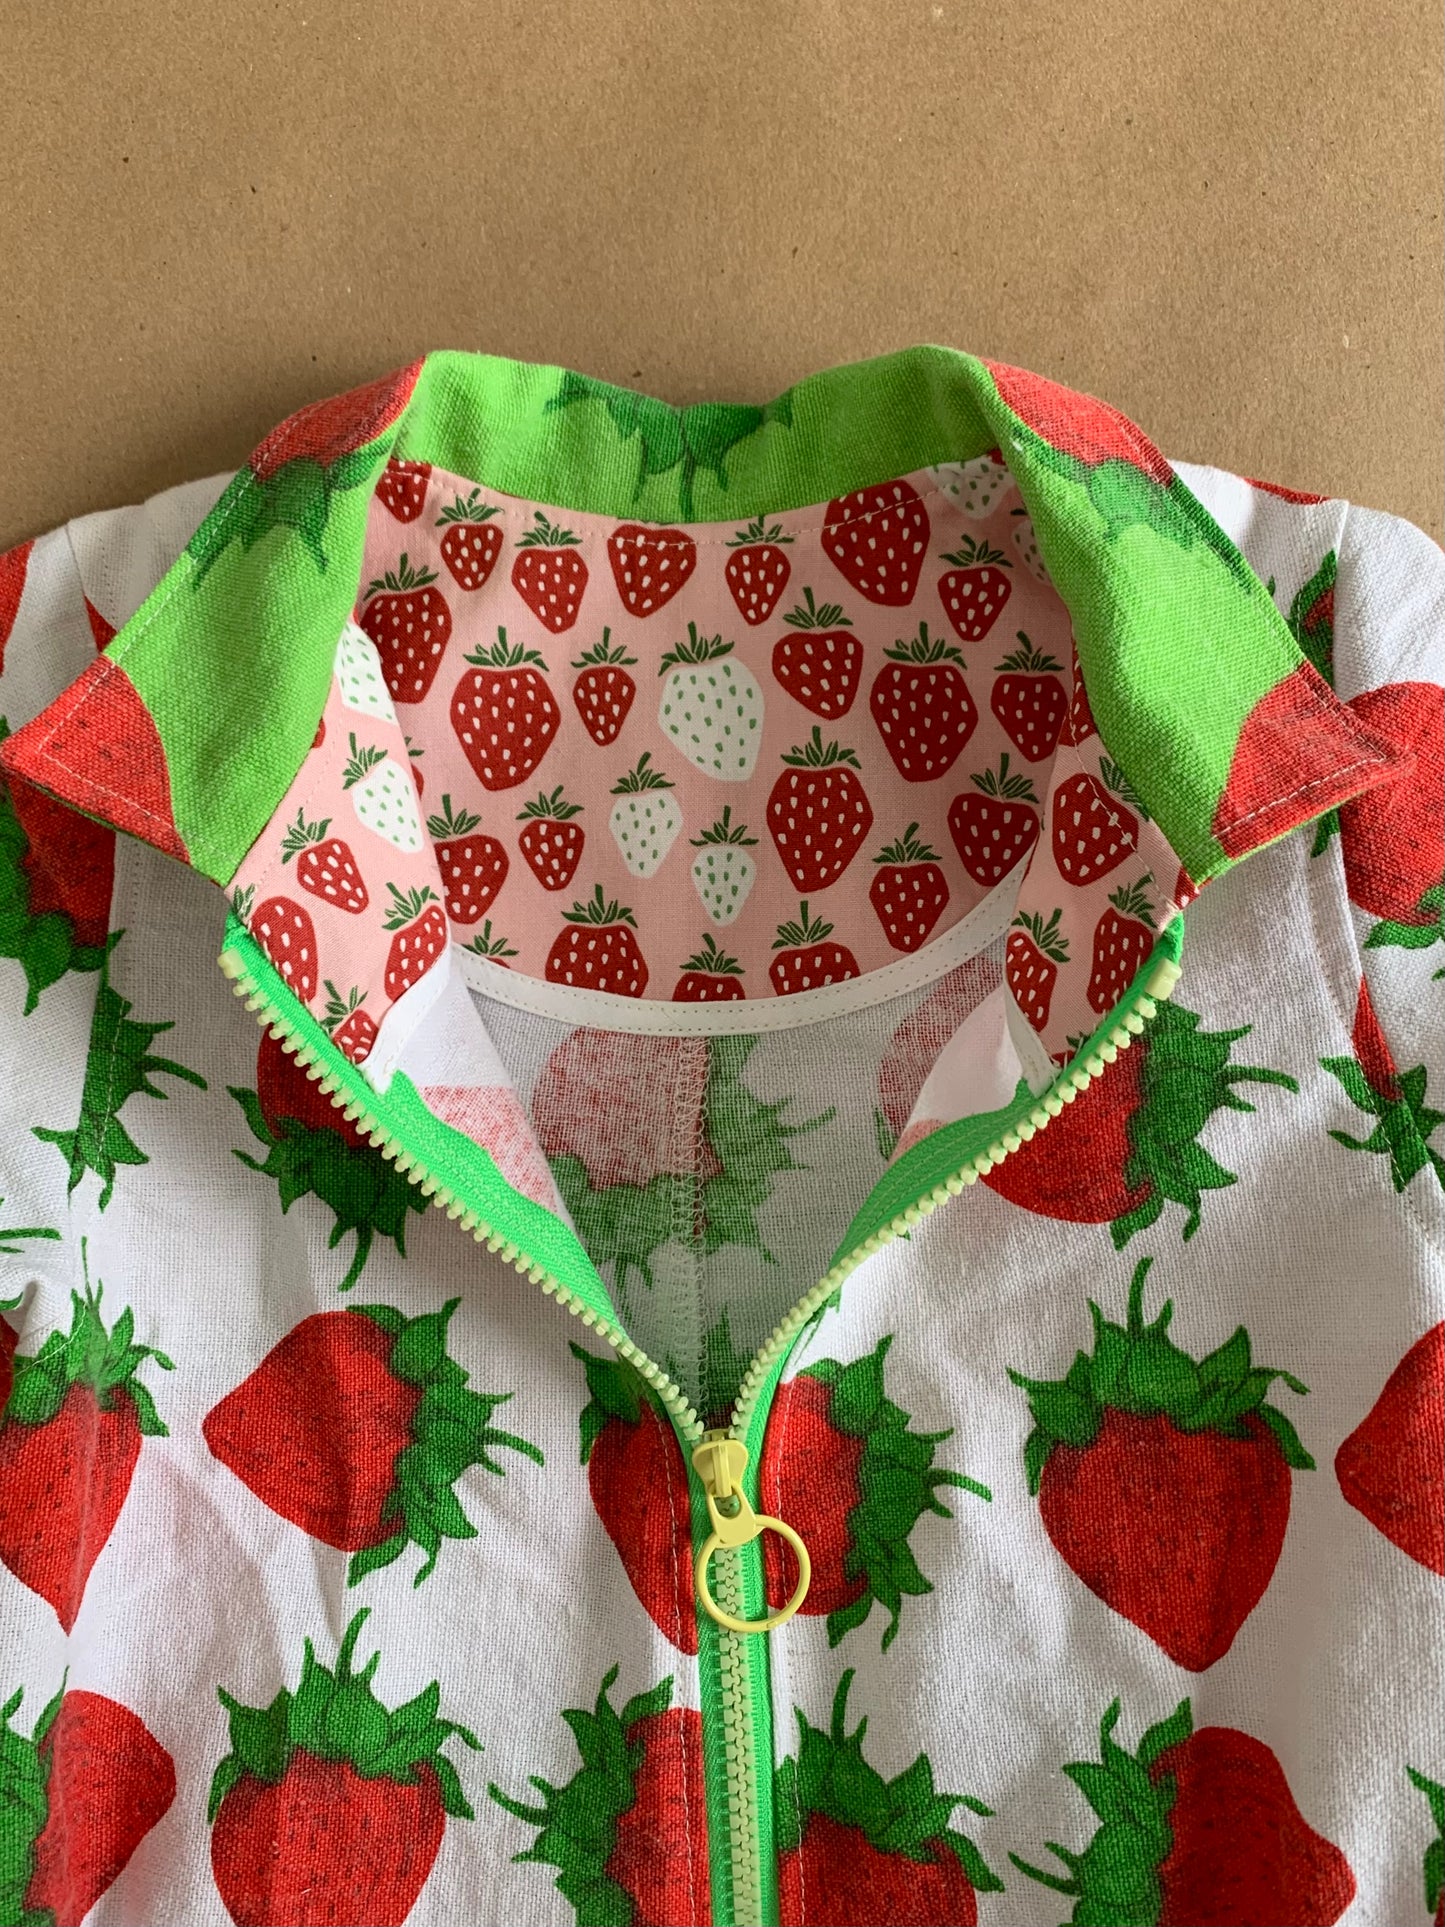 RTS | short sleeve strawberry boiler suit | size 6yr